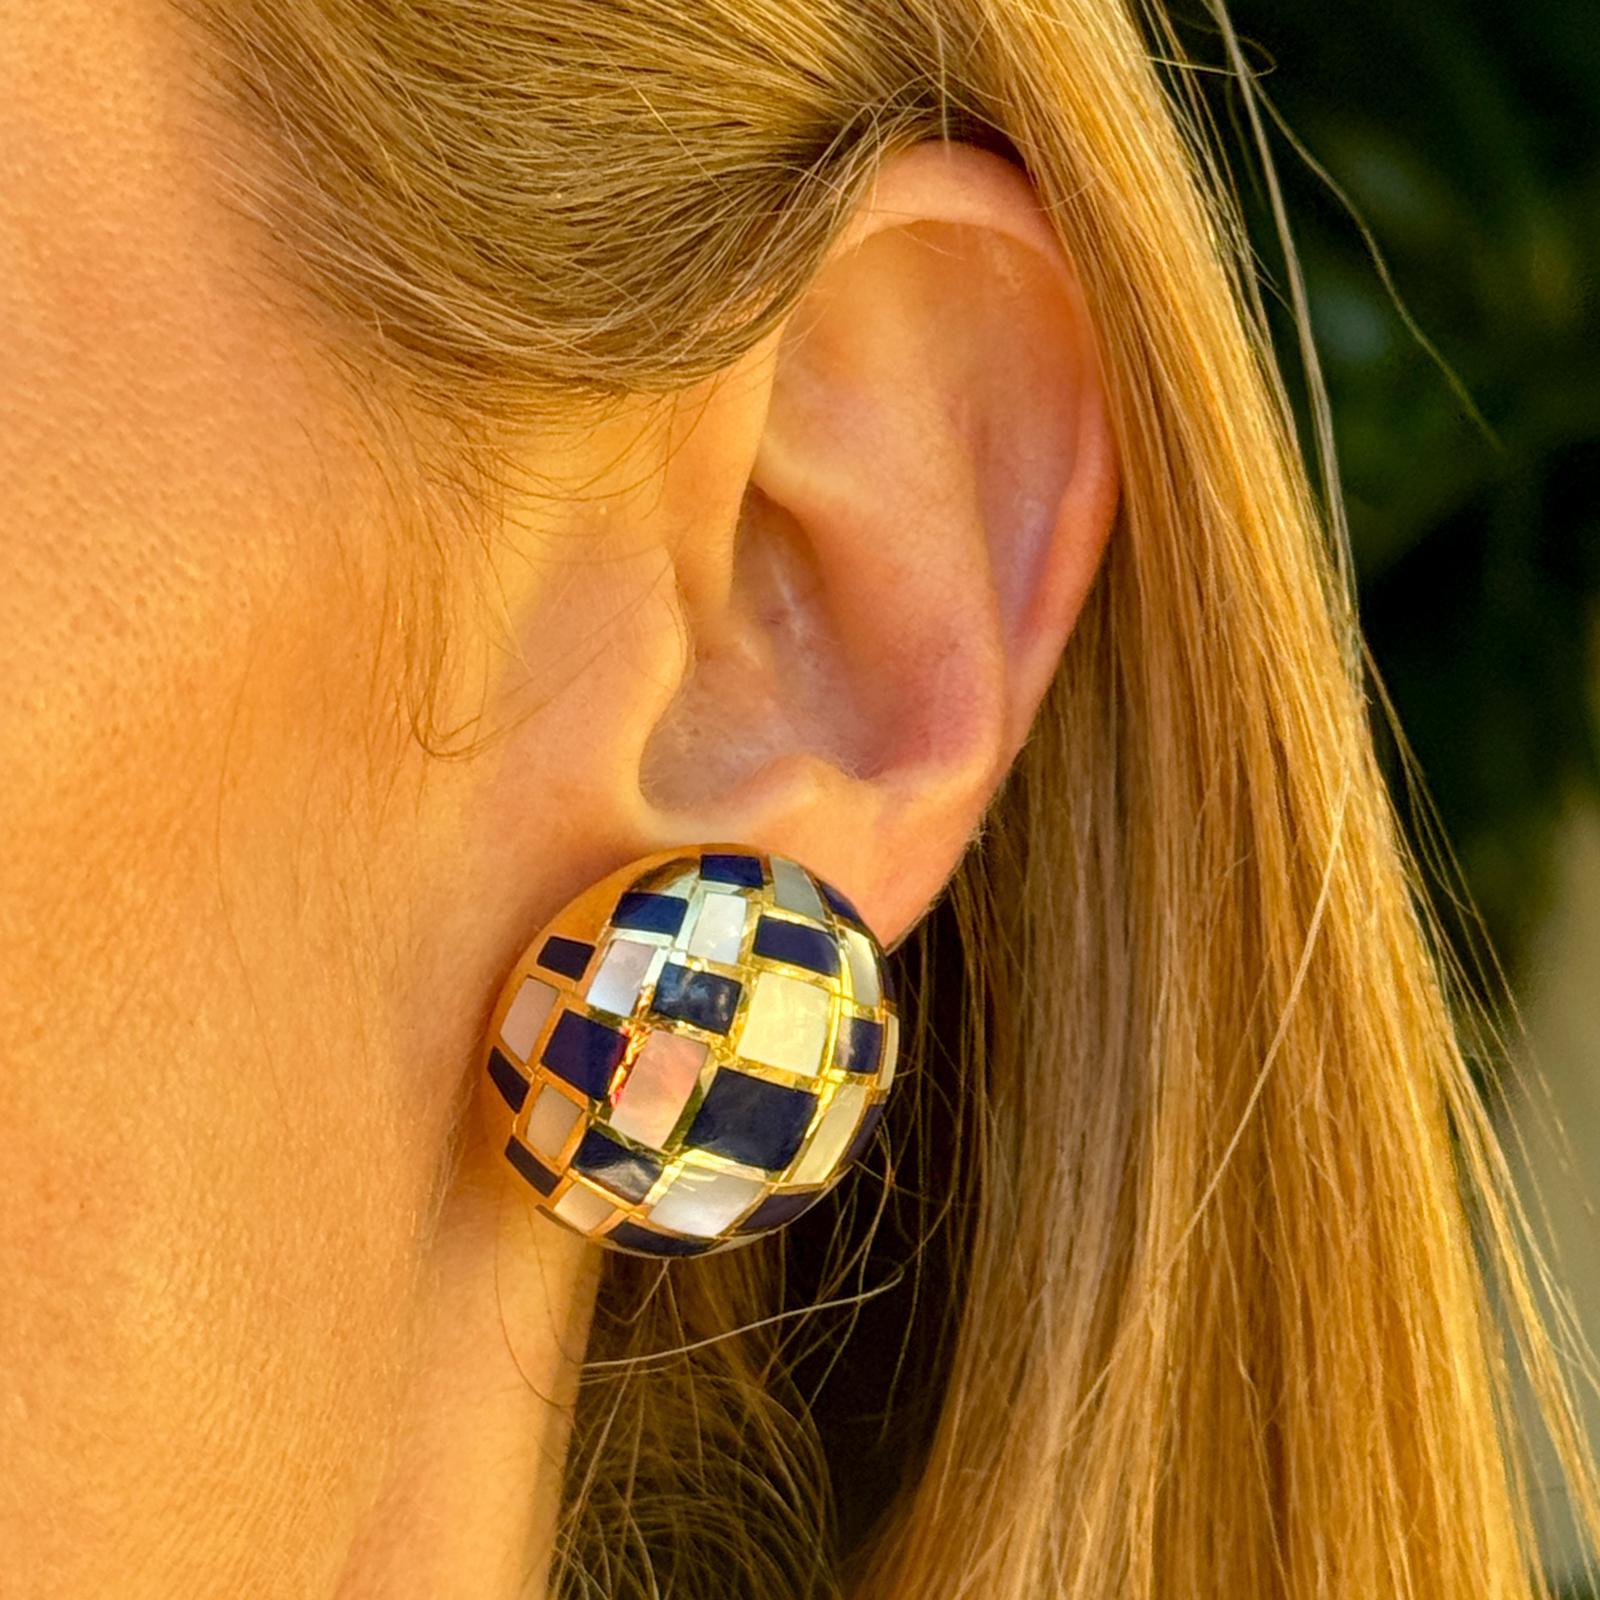 Iconic mother of pearl and lapis lazuli earrings by Angela Cummings for Tiffany & Co. The earrings feature inlays of mother of pearl and lapiz lazuli gemstone in a checkerboard pattern. The round earrings measure approximately  25 x 25mm and clip-on